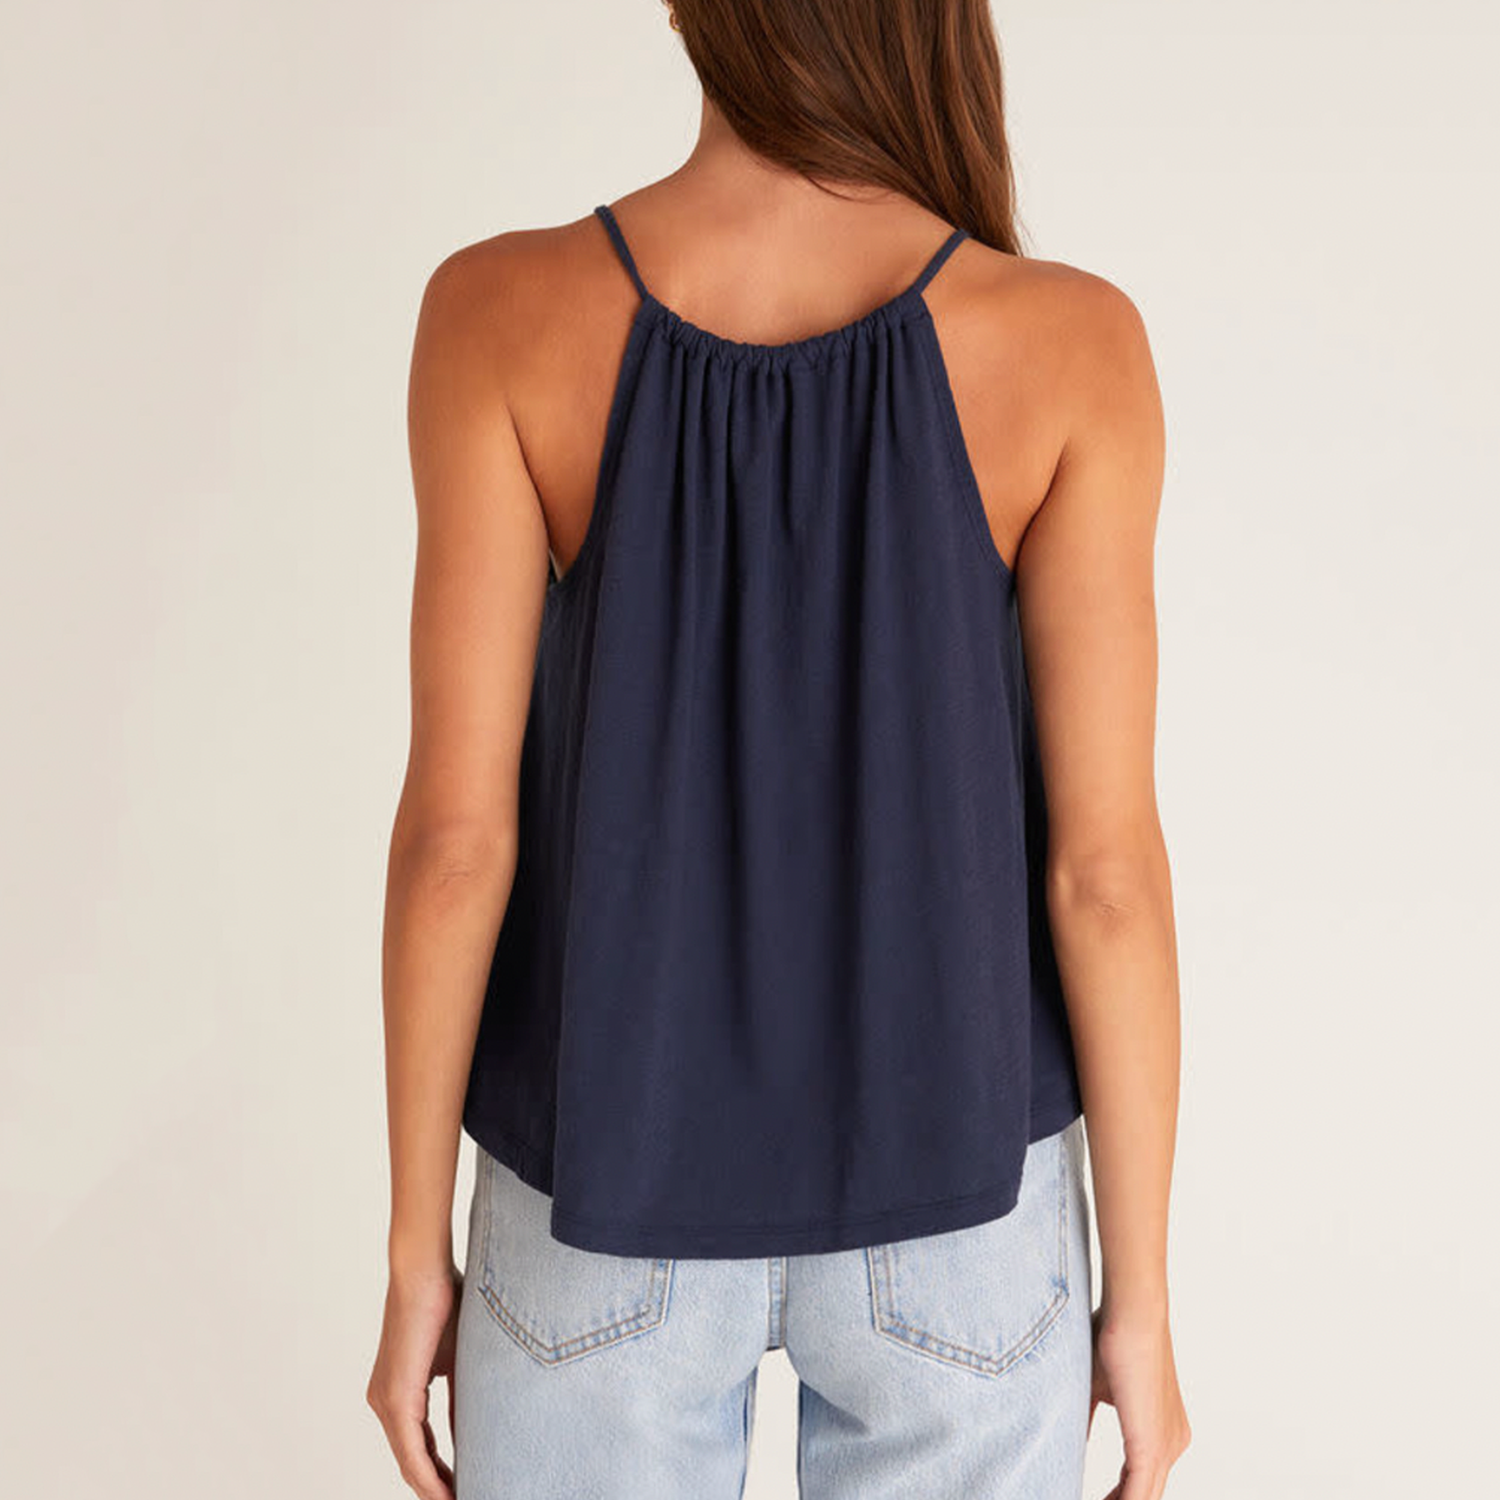 Z Supply Daphne Tank. An iconic summer silhouette, the Daphne Tank takes the spaghetti strap, keyhole look to a new level of comfort. Made using a lightweight fabric, this tank has a relaxed, flowy feel and pairs perfectly with fitted denim or shorts